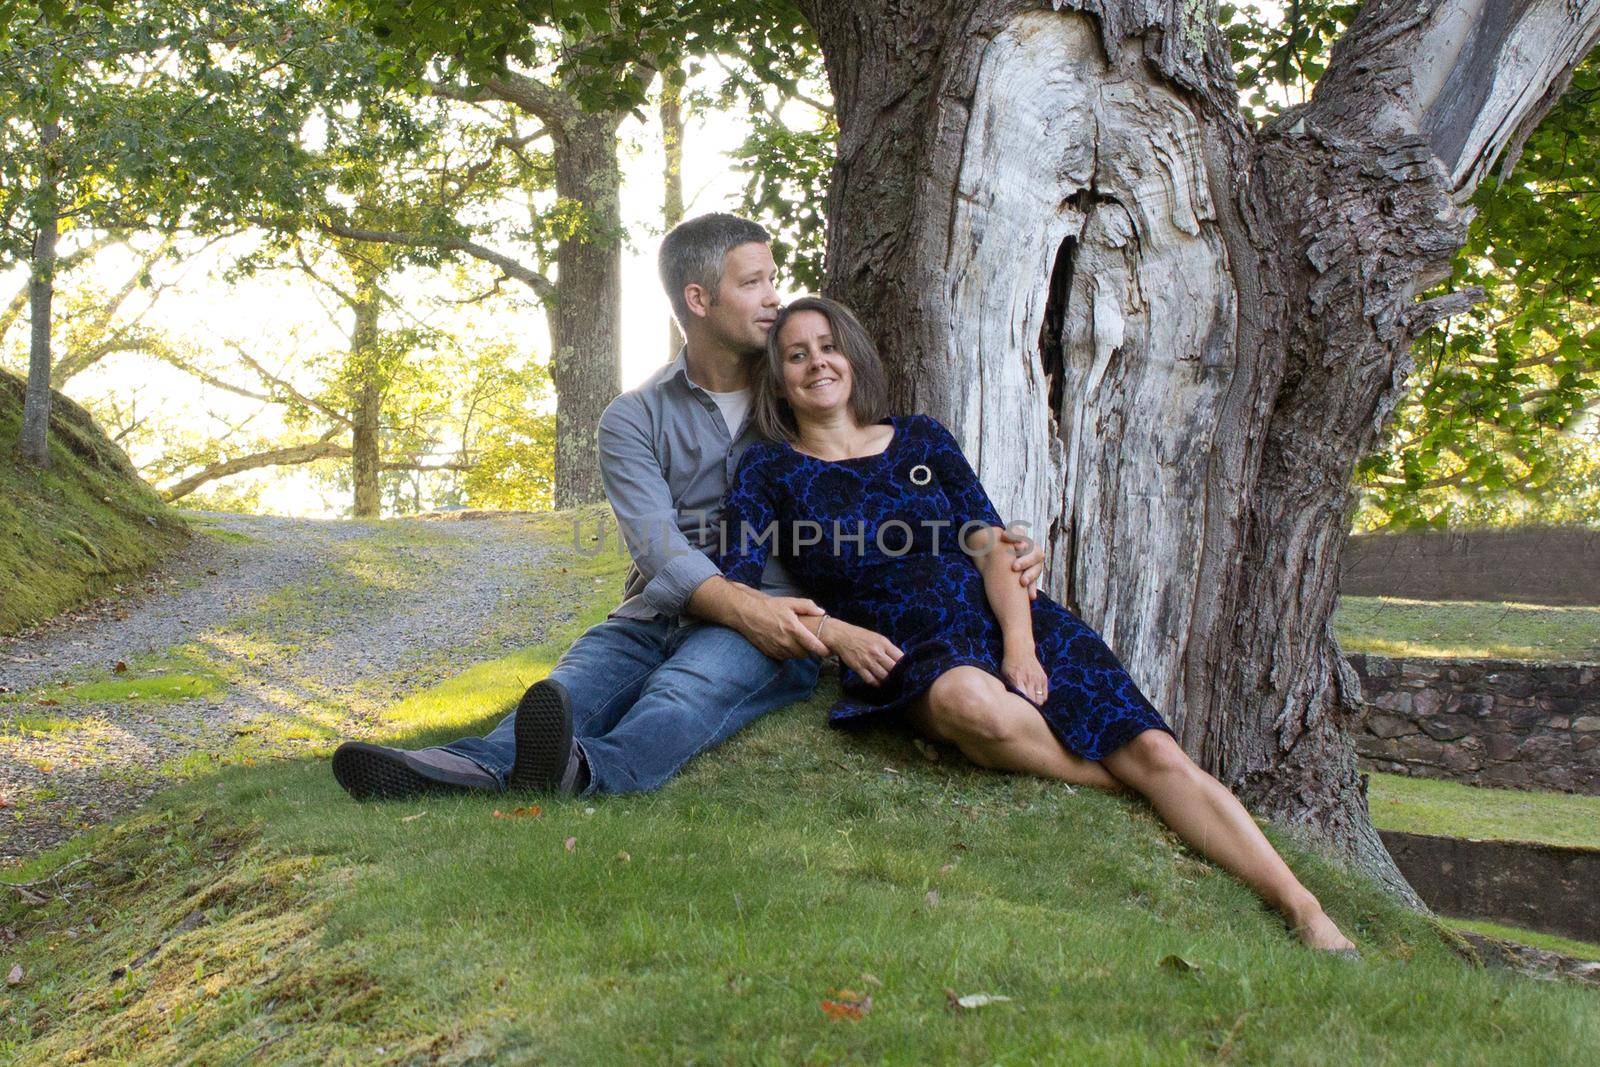 man and woman relax and smile under a big oak tree 